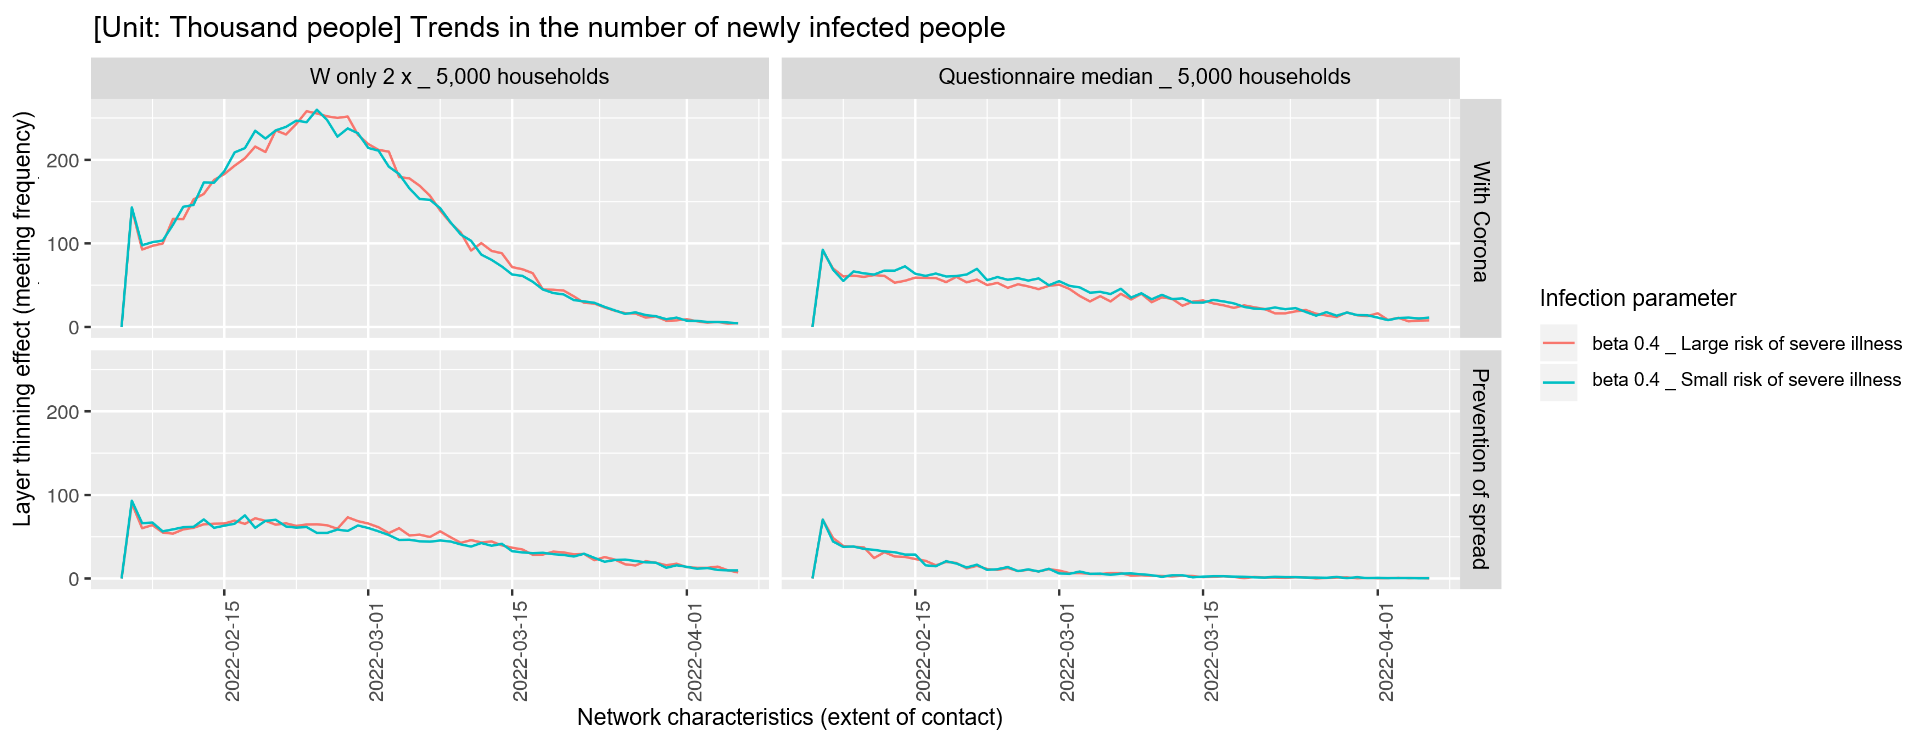 Model B Results: Number of Newly Infected People (beta = 0.4 only / 2*2 cells expanded in the lower right of the previous section)